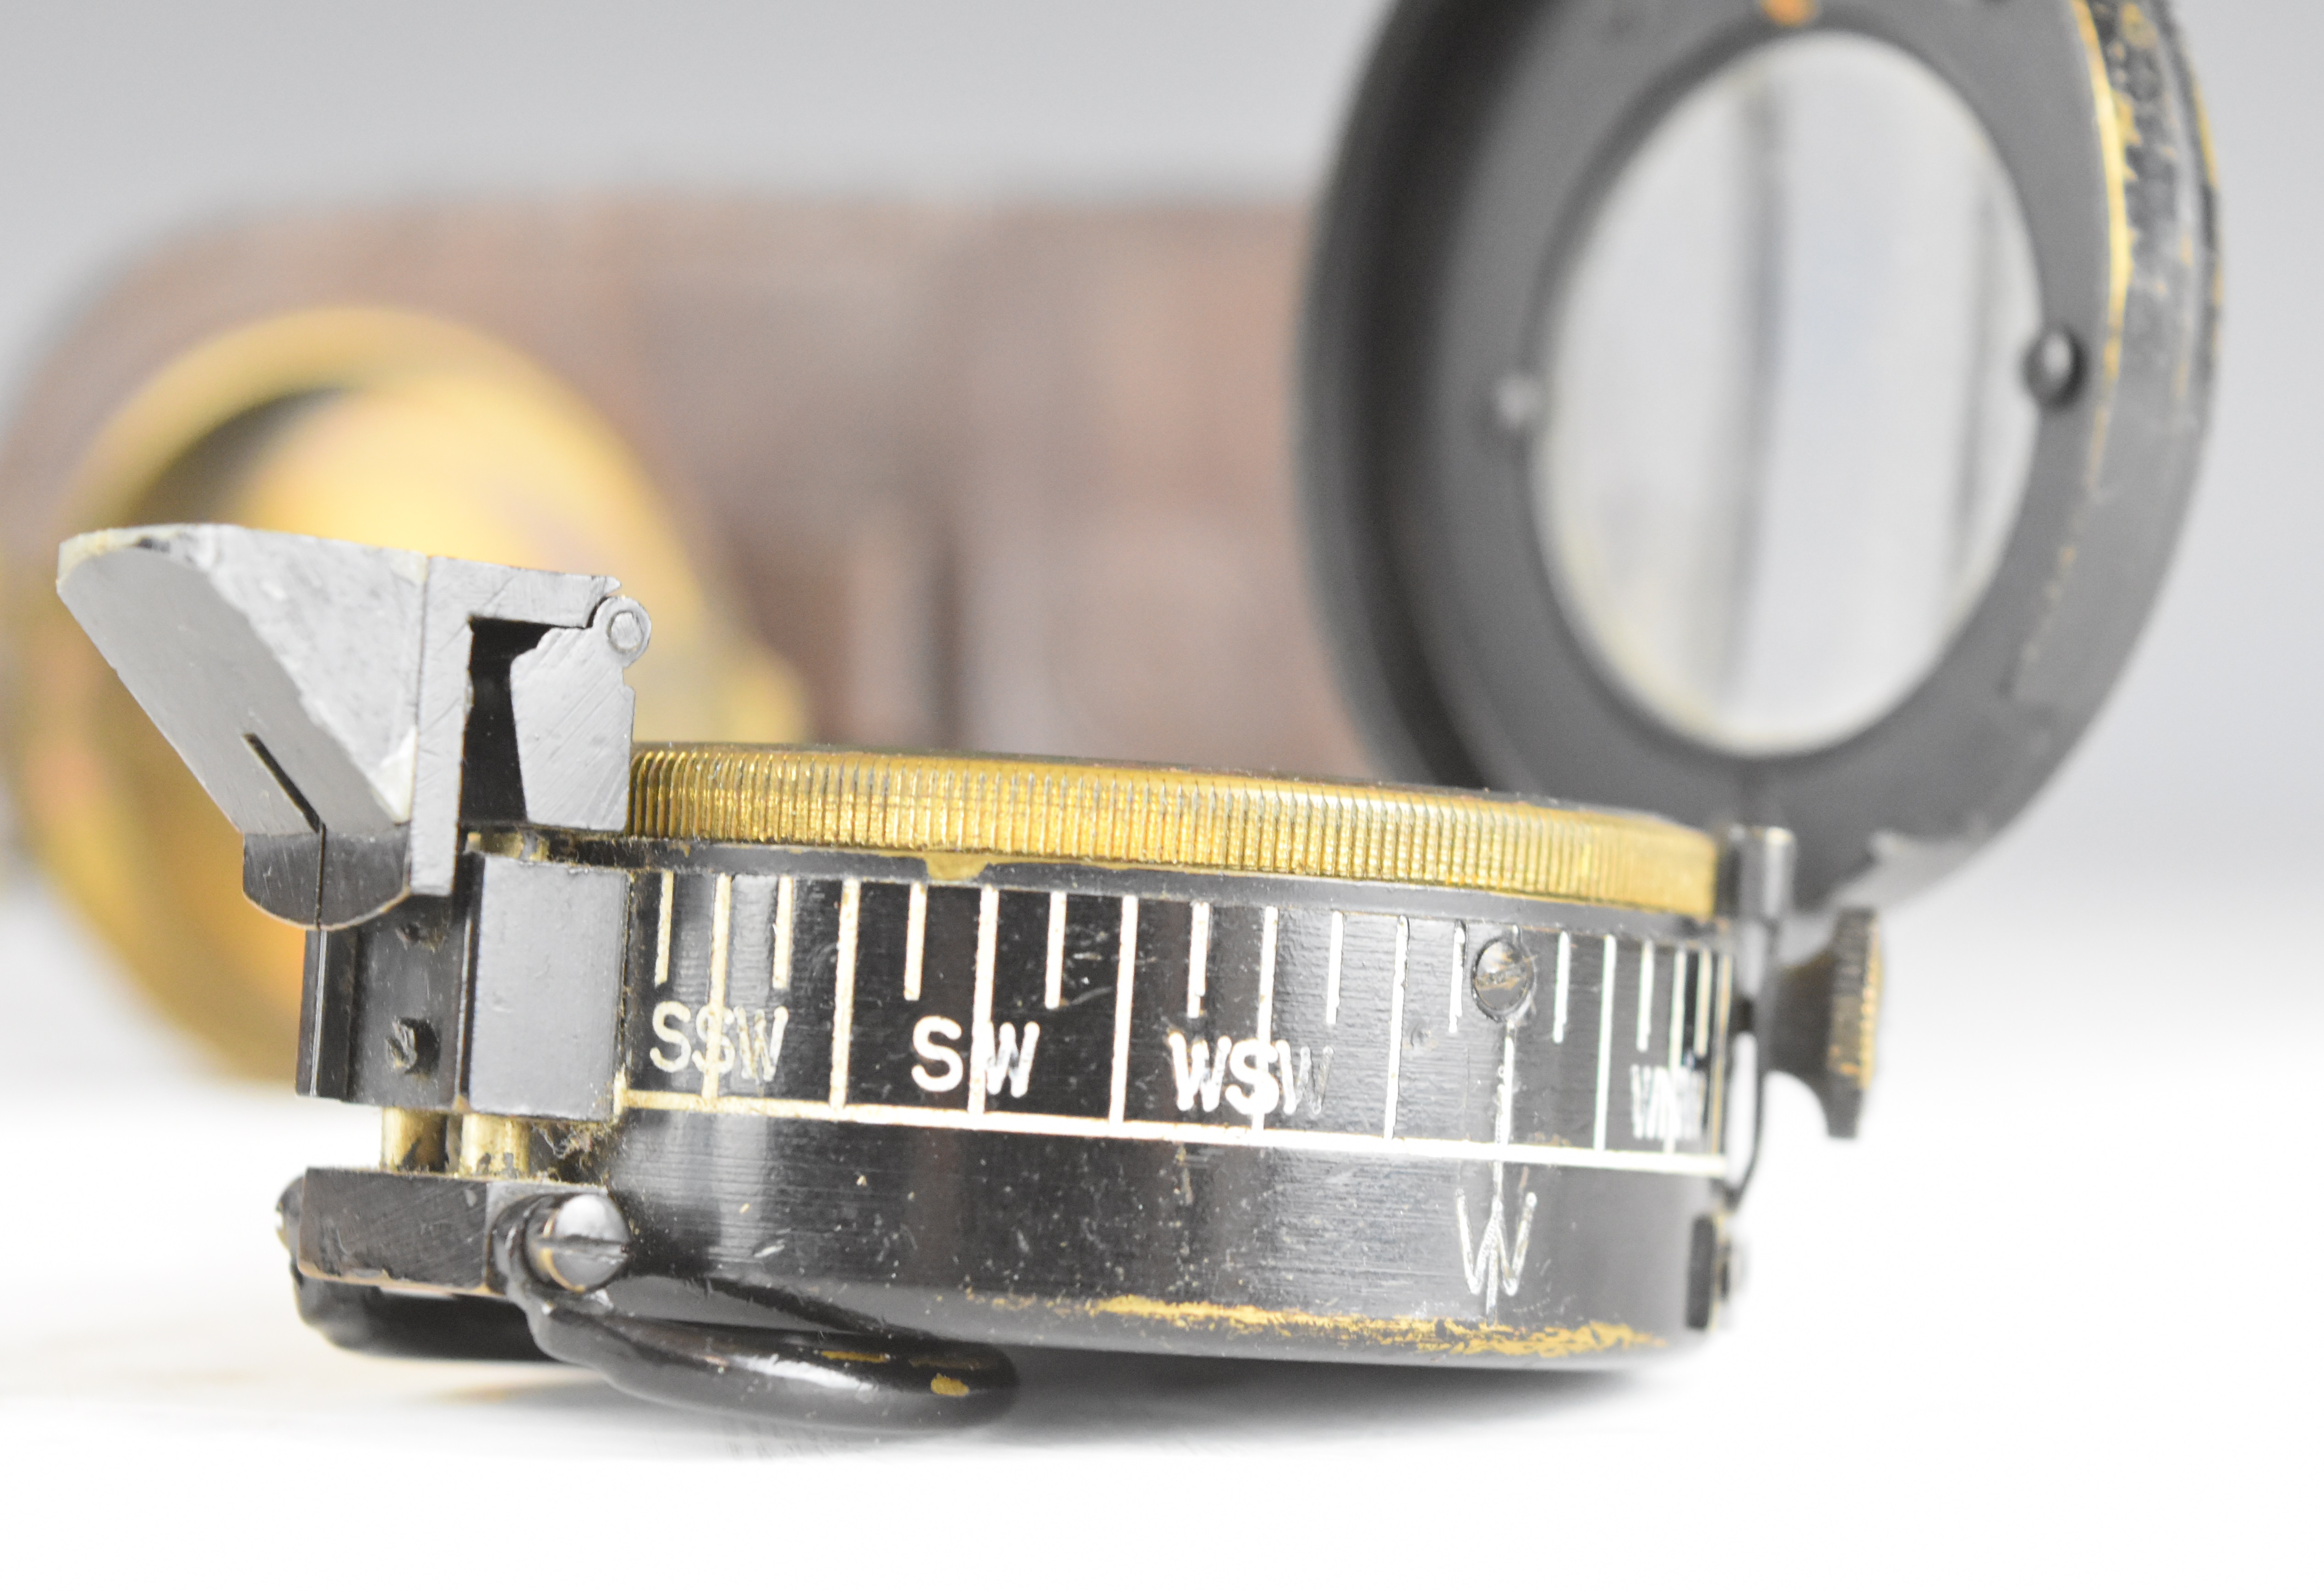 British WW2 prismatic compass by T G Co Ltd, London No B187104 1942 Mk III, with broad arrow mark, - Image 2 of 10